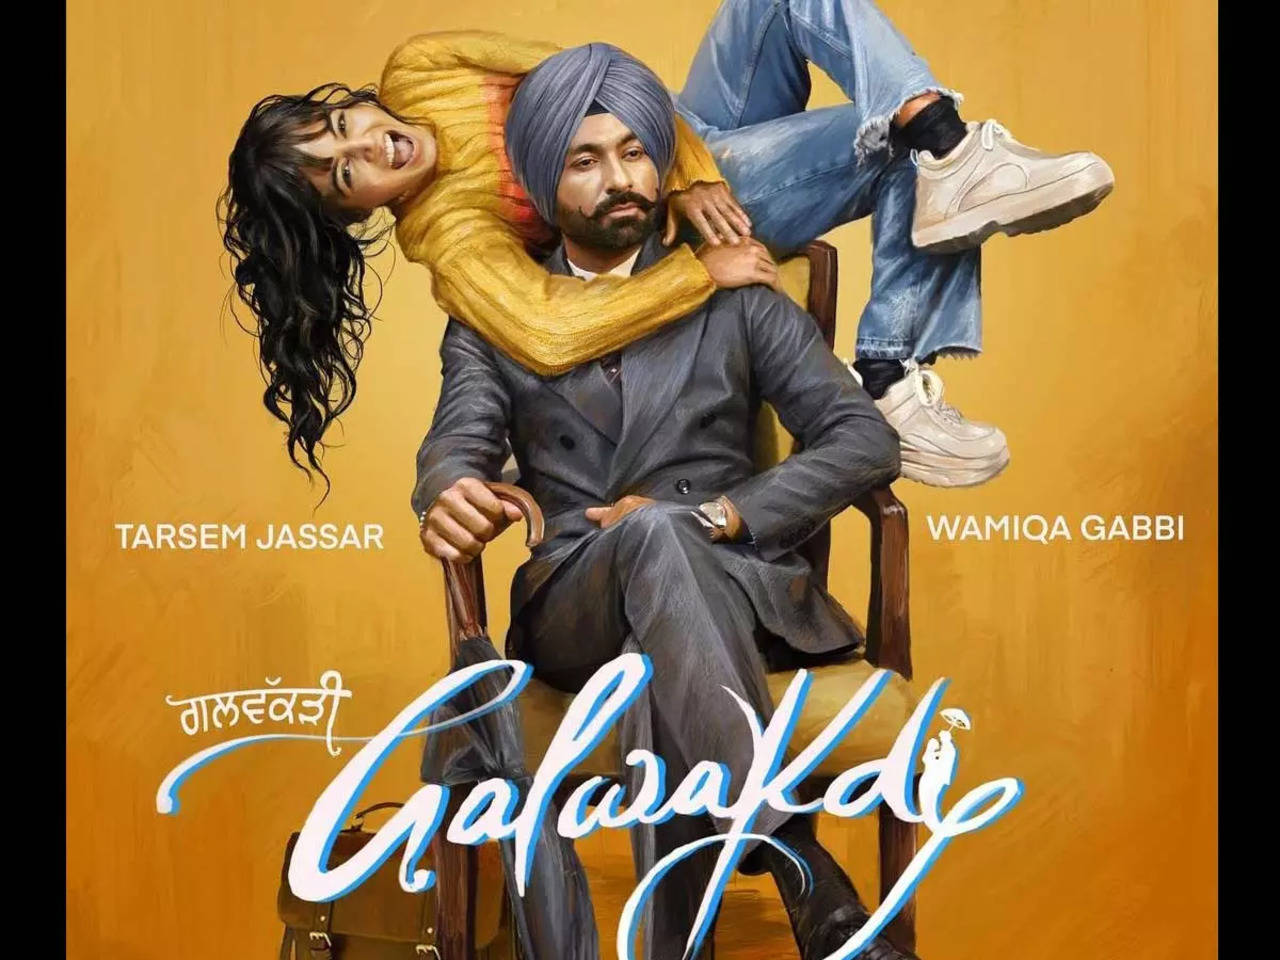 Galwakdi Trailer Watch how a strict and boring man Tarsem Jassar falls in love with a carefree girl Wamiqa Gabbi, and then everything changes Punjabi Movie News image